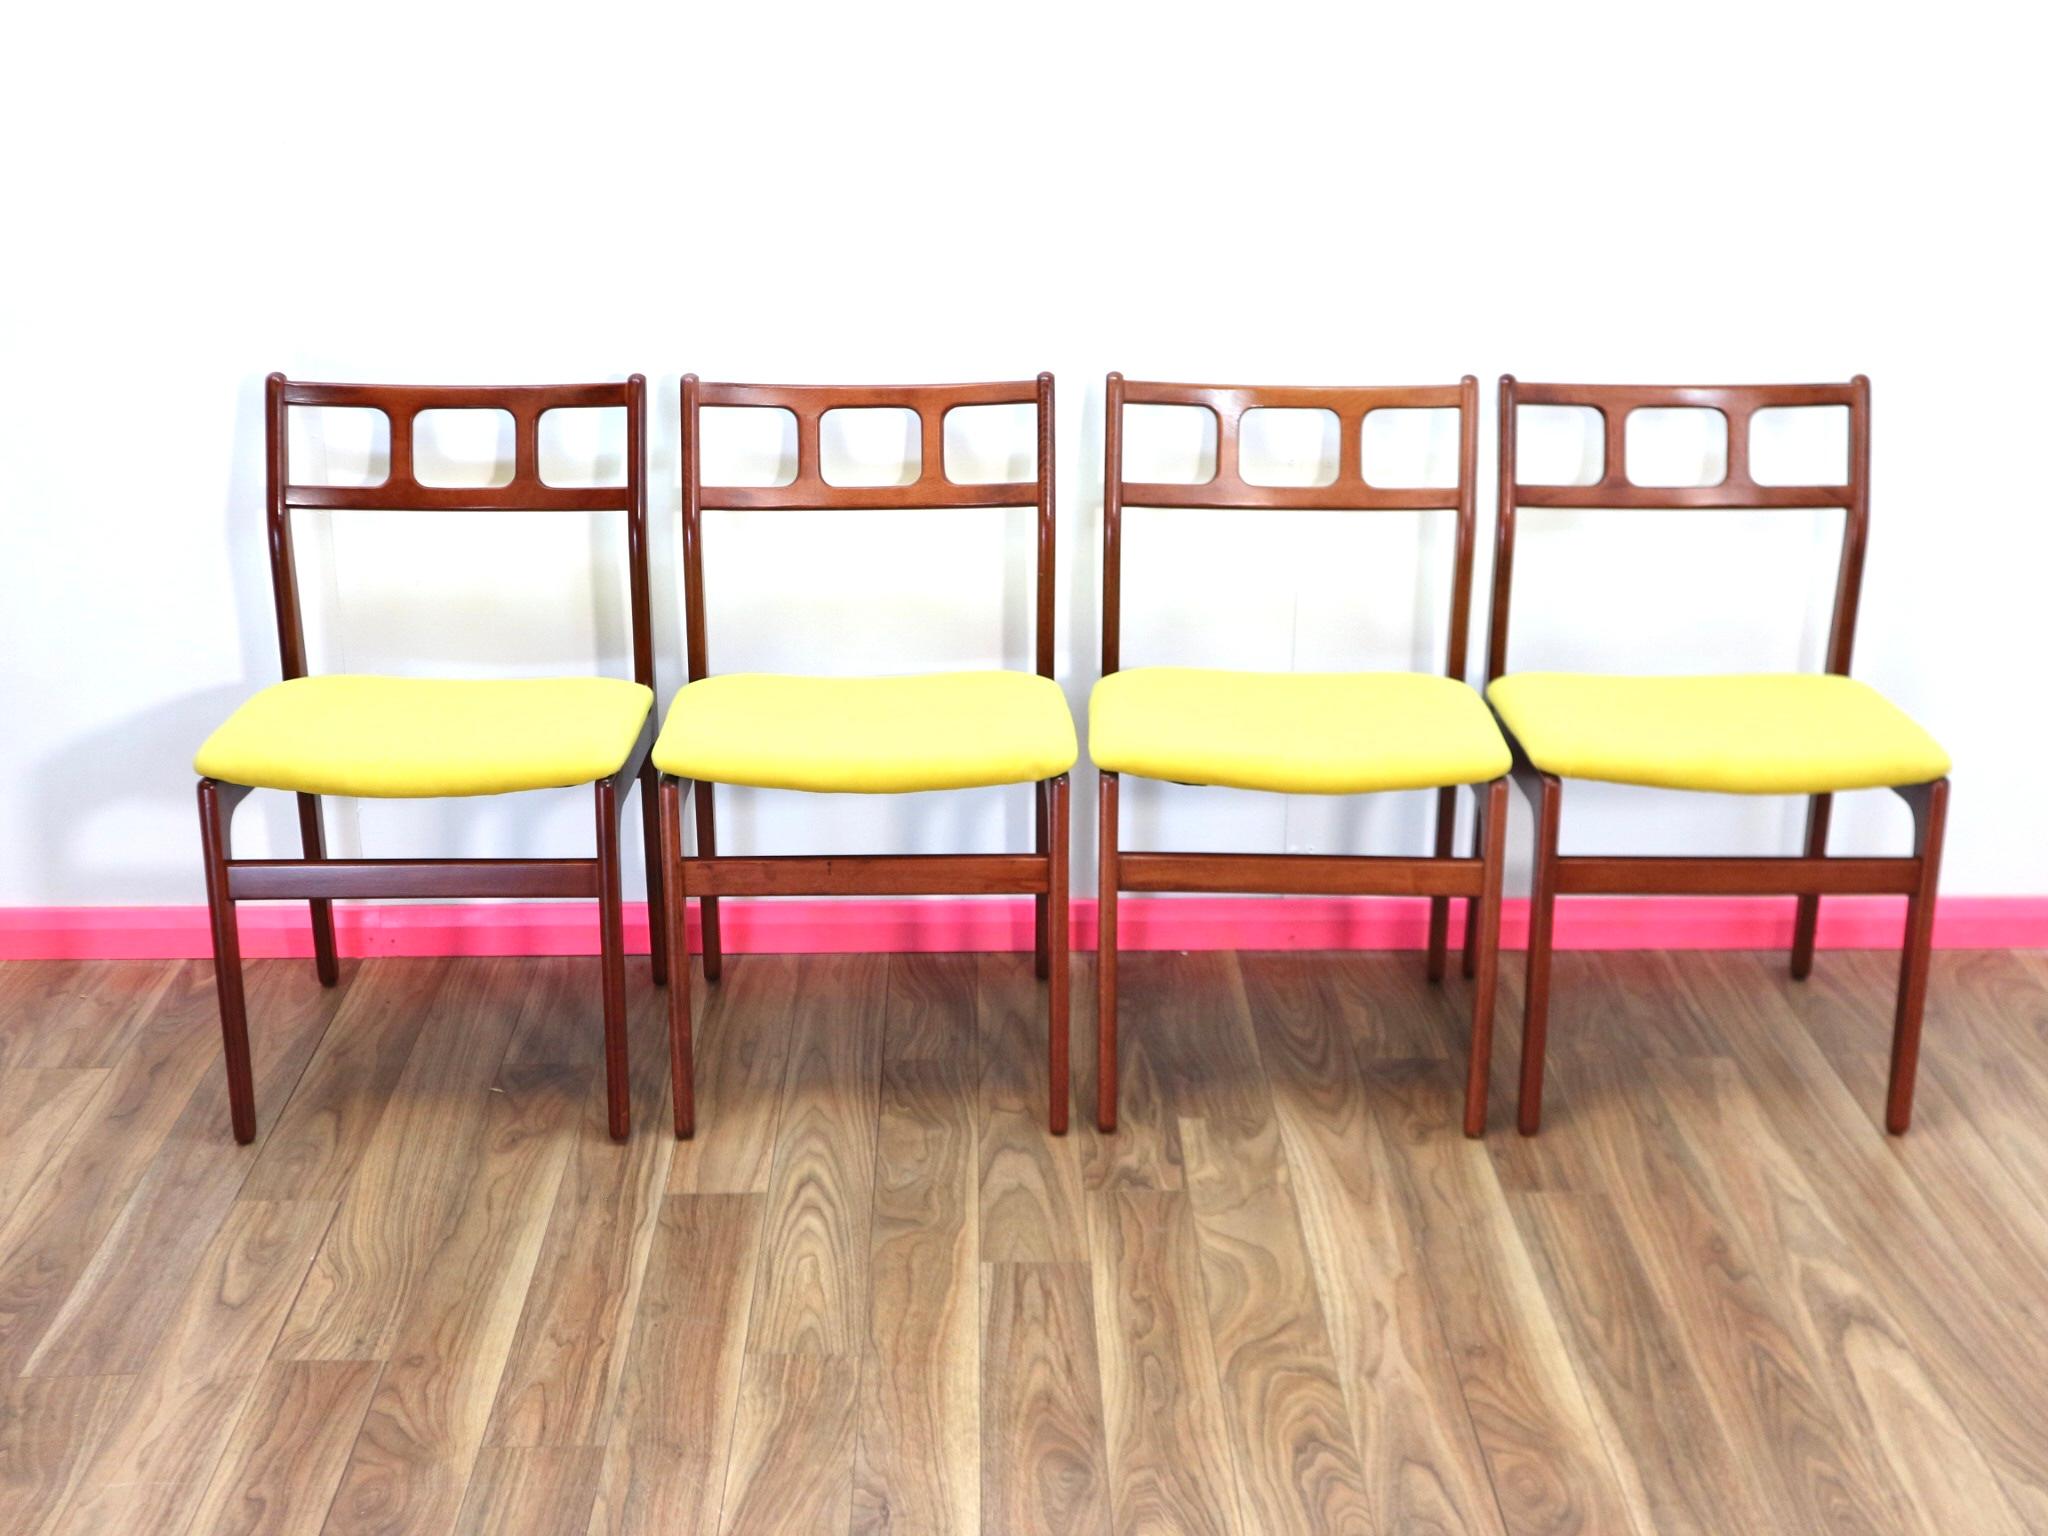 Set of 4 teak attractive mid-century Danish modern reupholstered dining chairs in vibrant yellow. This stylish set has looks, design and beautiful architecture all in one cool package. Attractive frames angle backs, in the manor of JL Moller, with